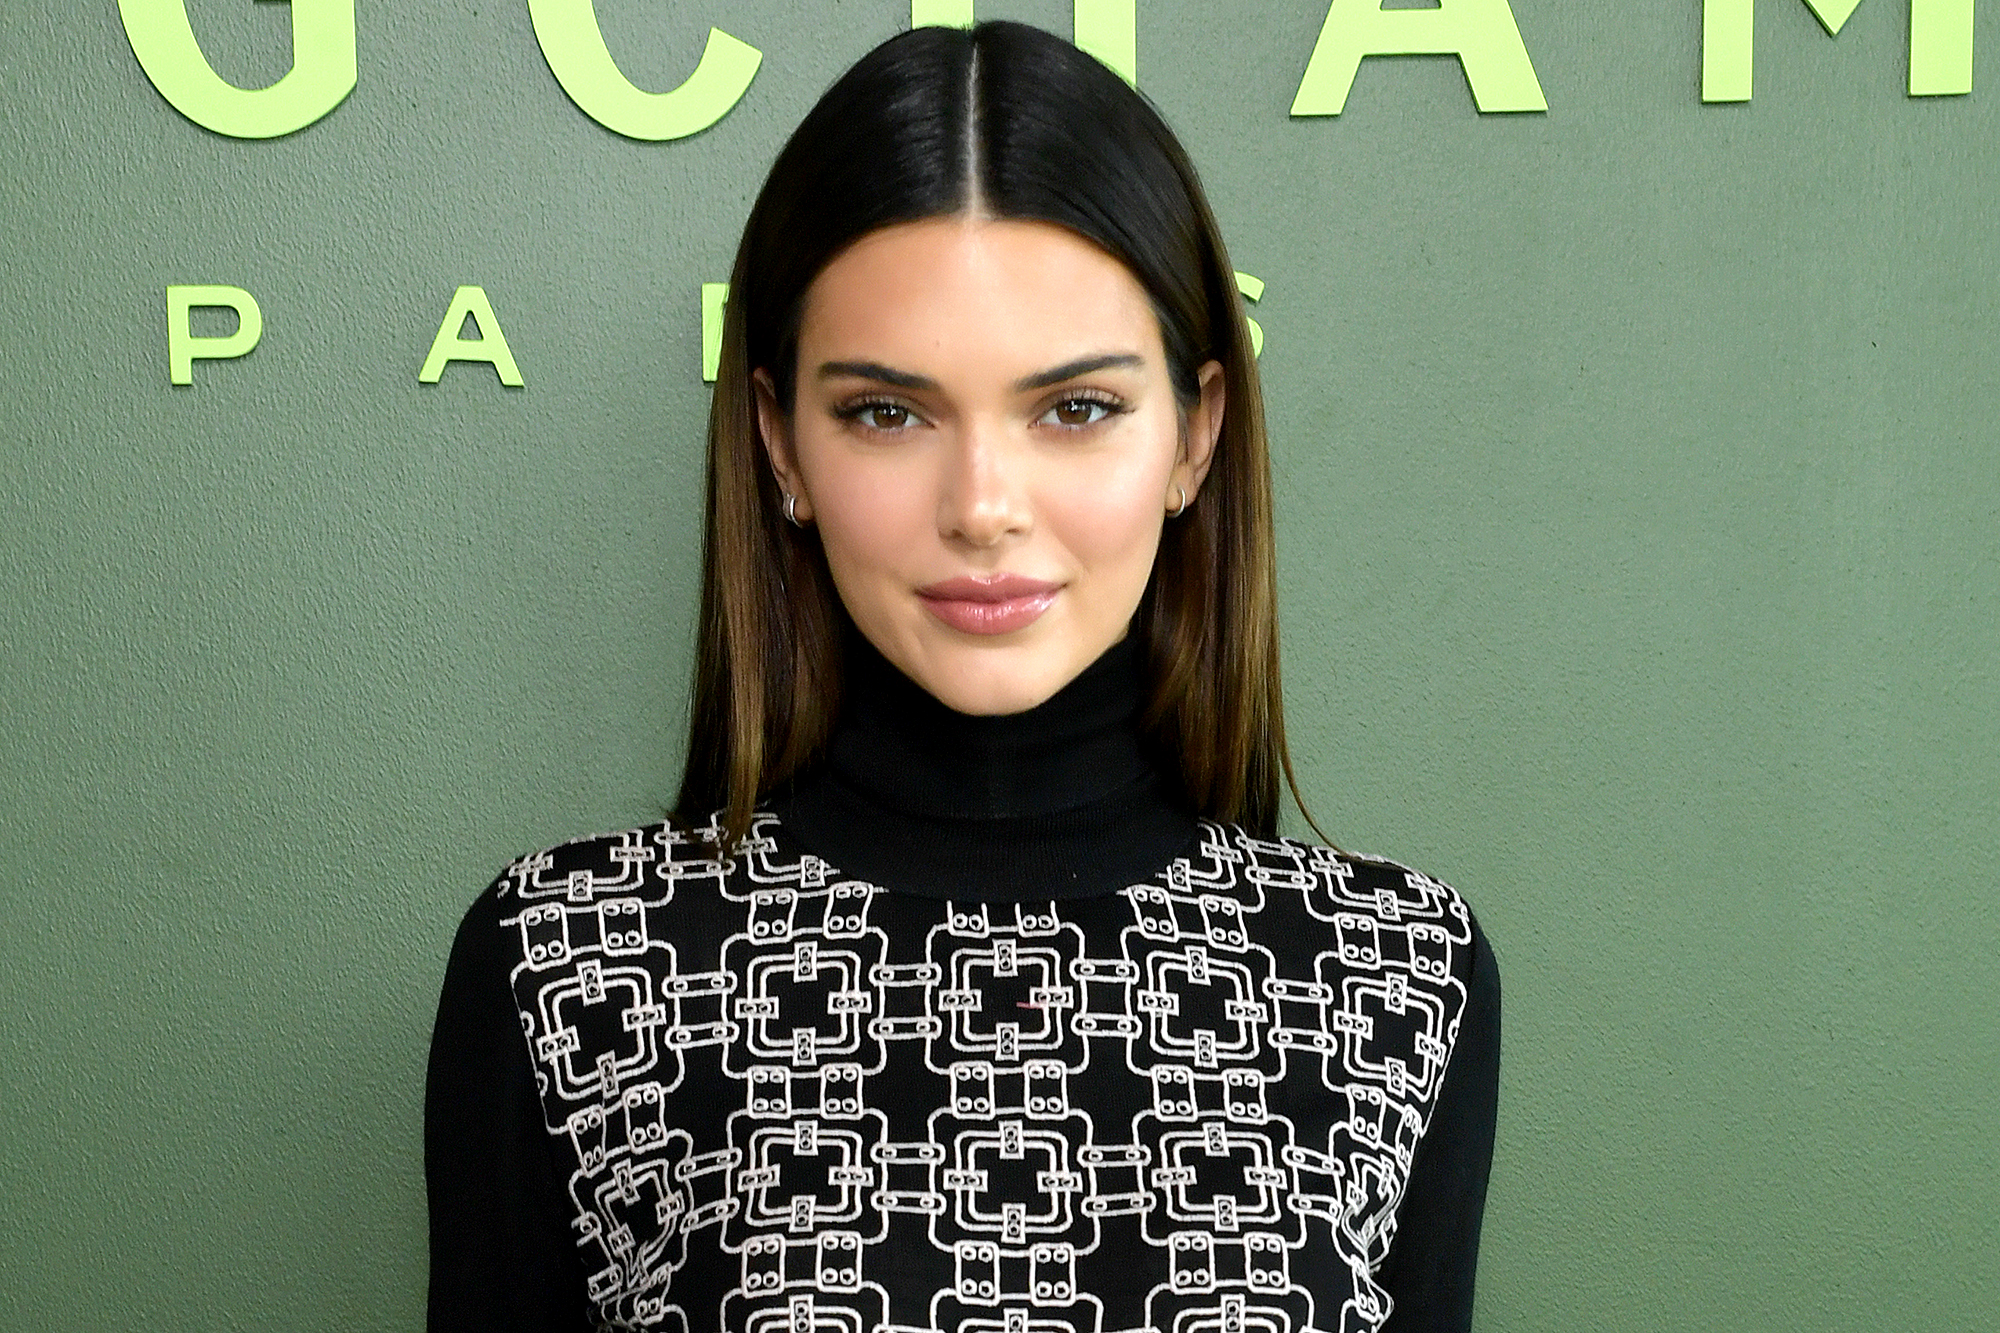 NEW YORK, NEW YORK - FEBRUARY 08:  Kendall Jenner attends the Longchamp Fall/Winter 2020 Runway Show at Hudson Commons on February 08, 2020 in New York City. (Photo by Ben Gabbe/Getty Images for Longchamp)